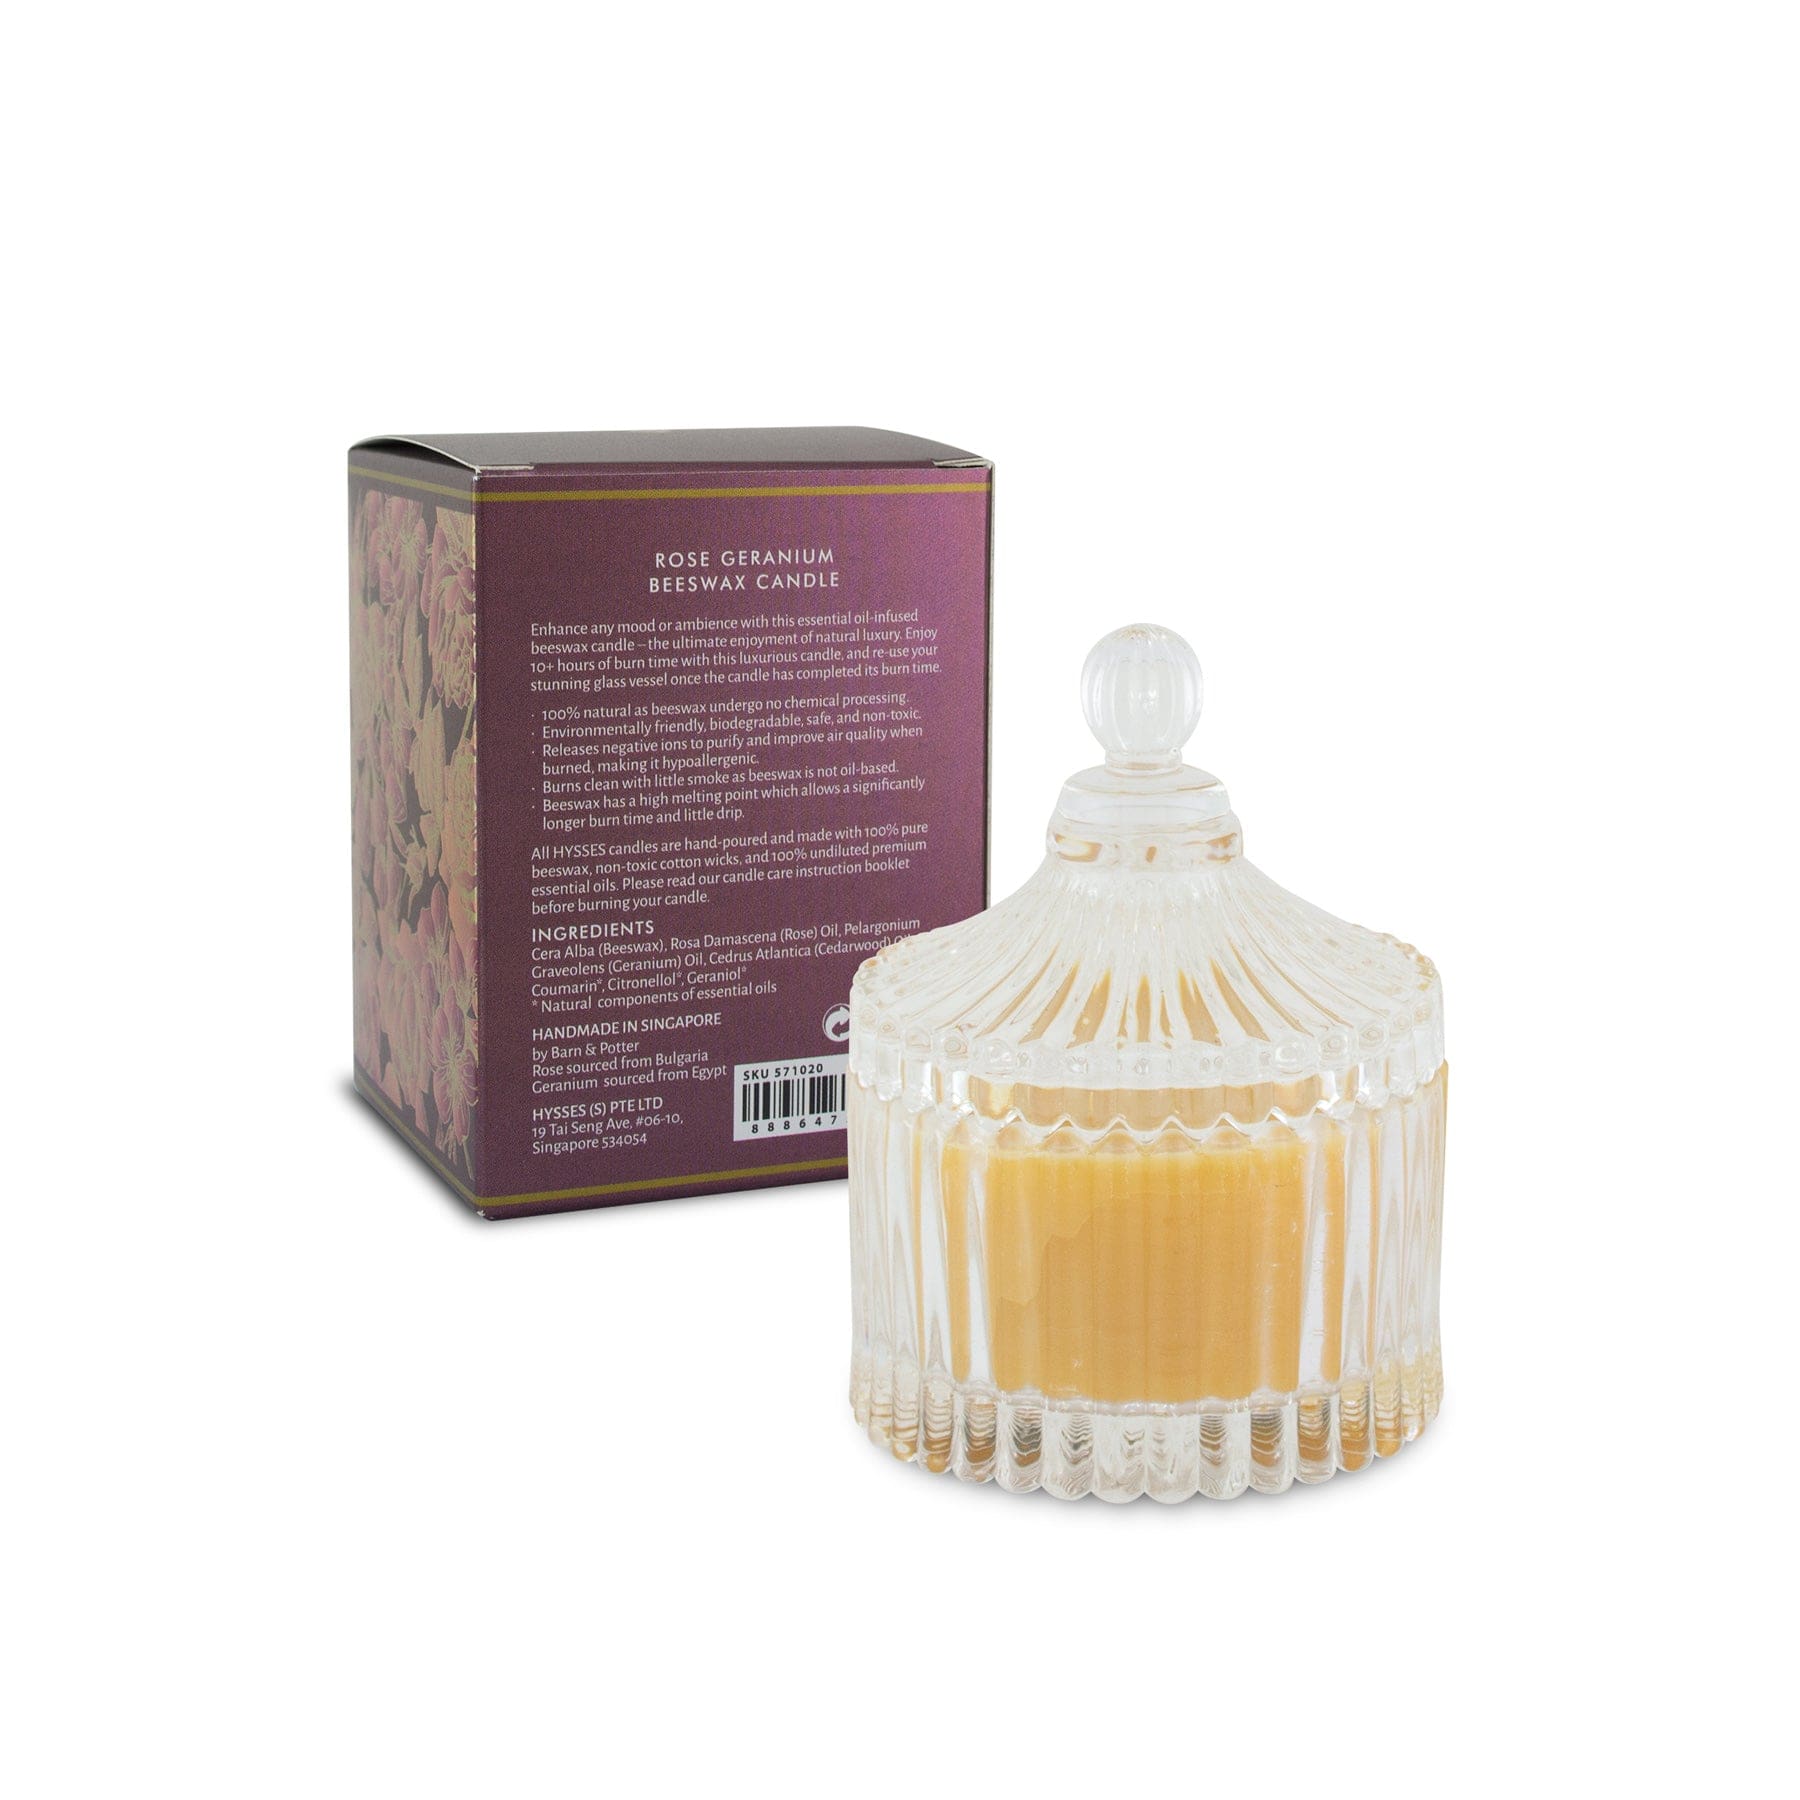 Hysses Home Scents 100g Beeswax Candle Rose Geranium, 100g